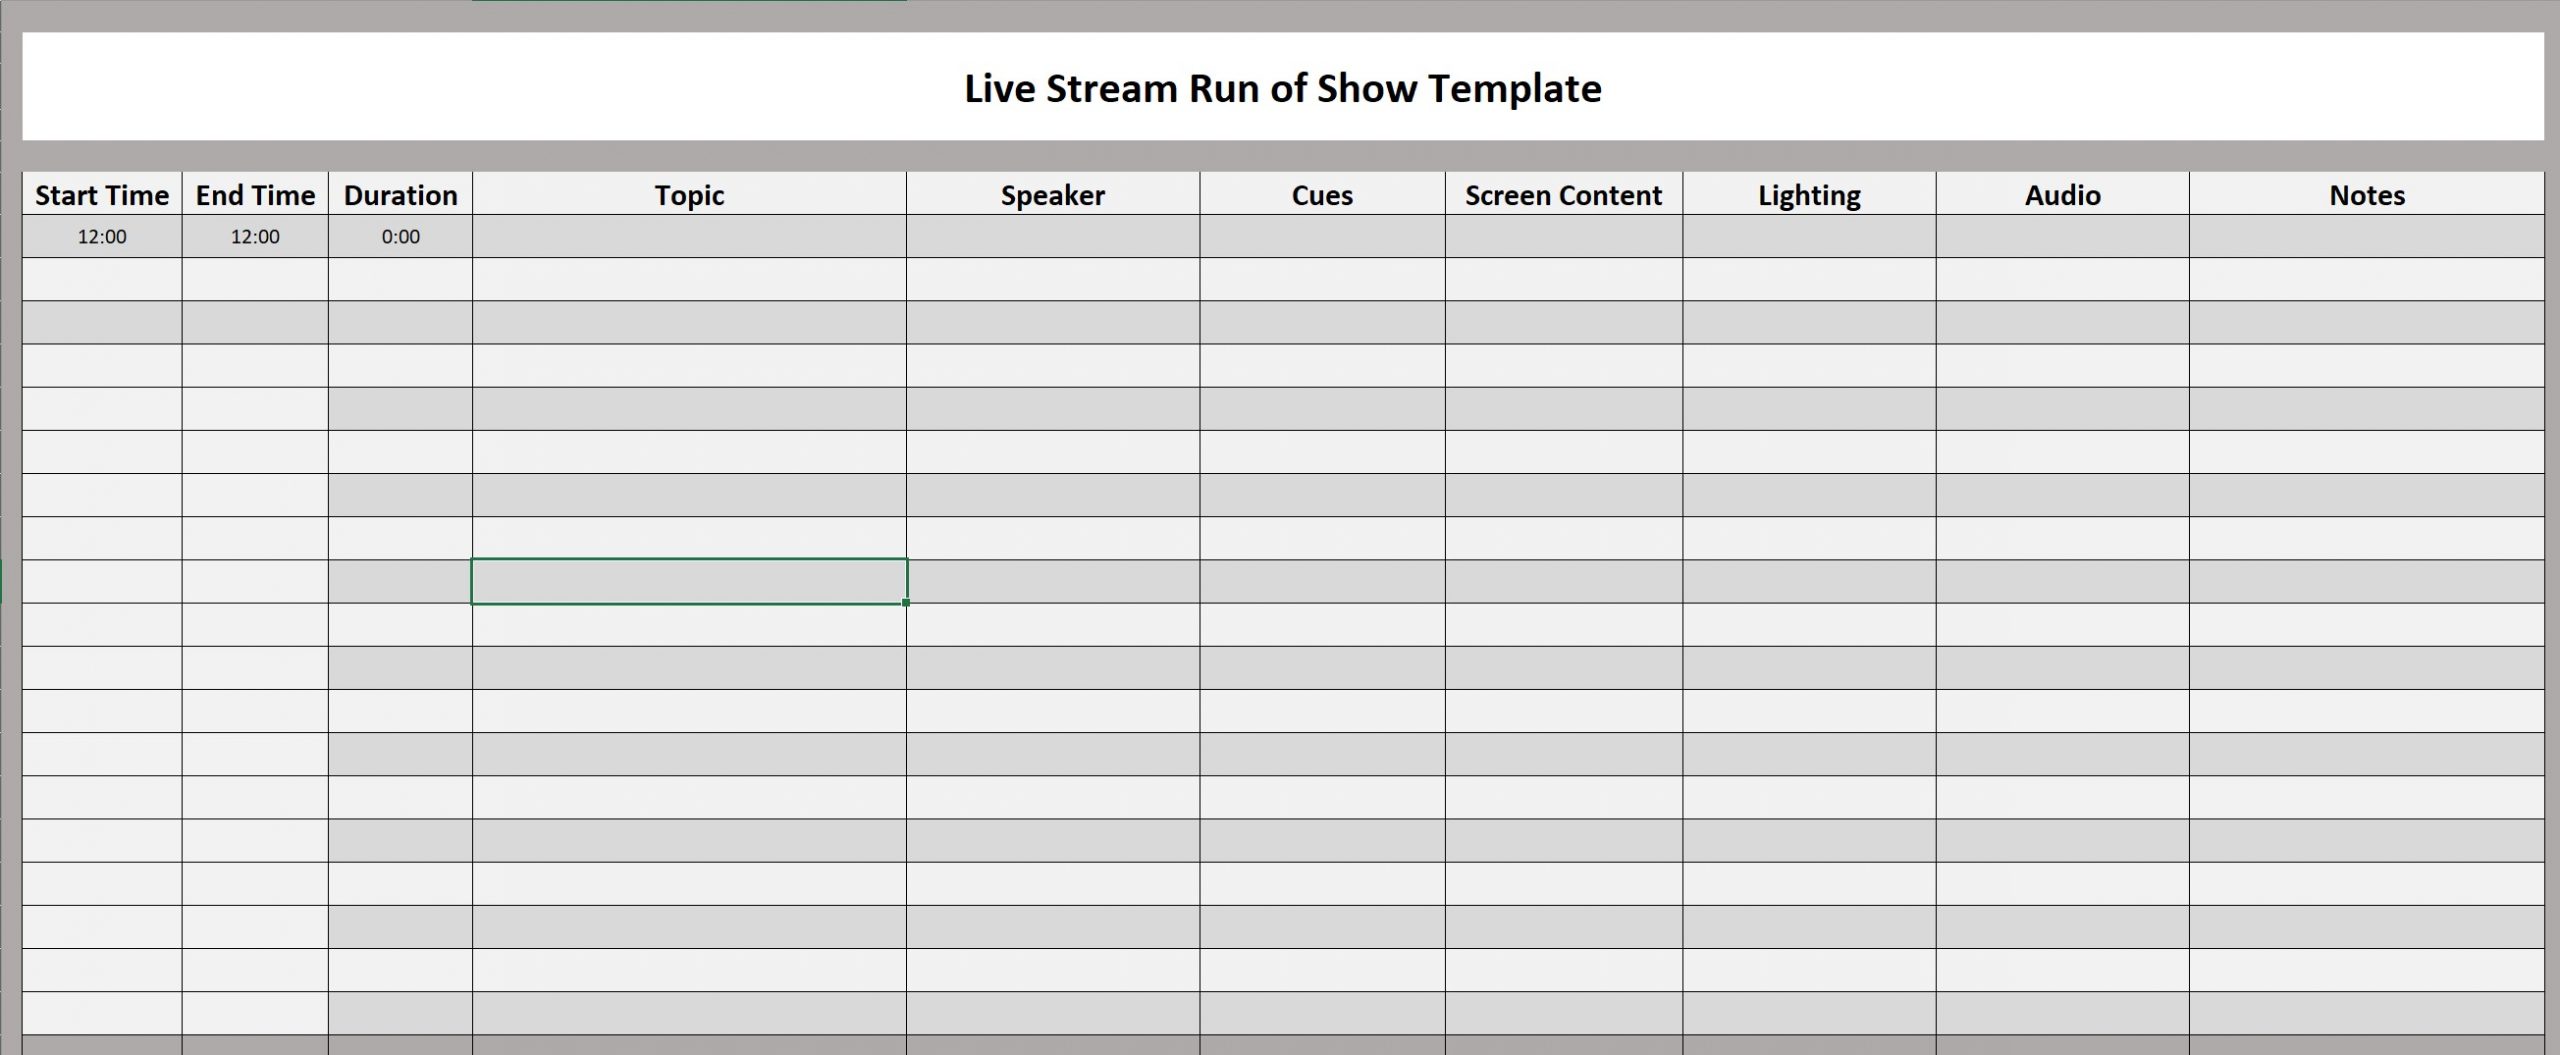 Run of Show 101: How to Make Your Live Stream Run Smoothly